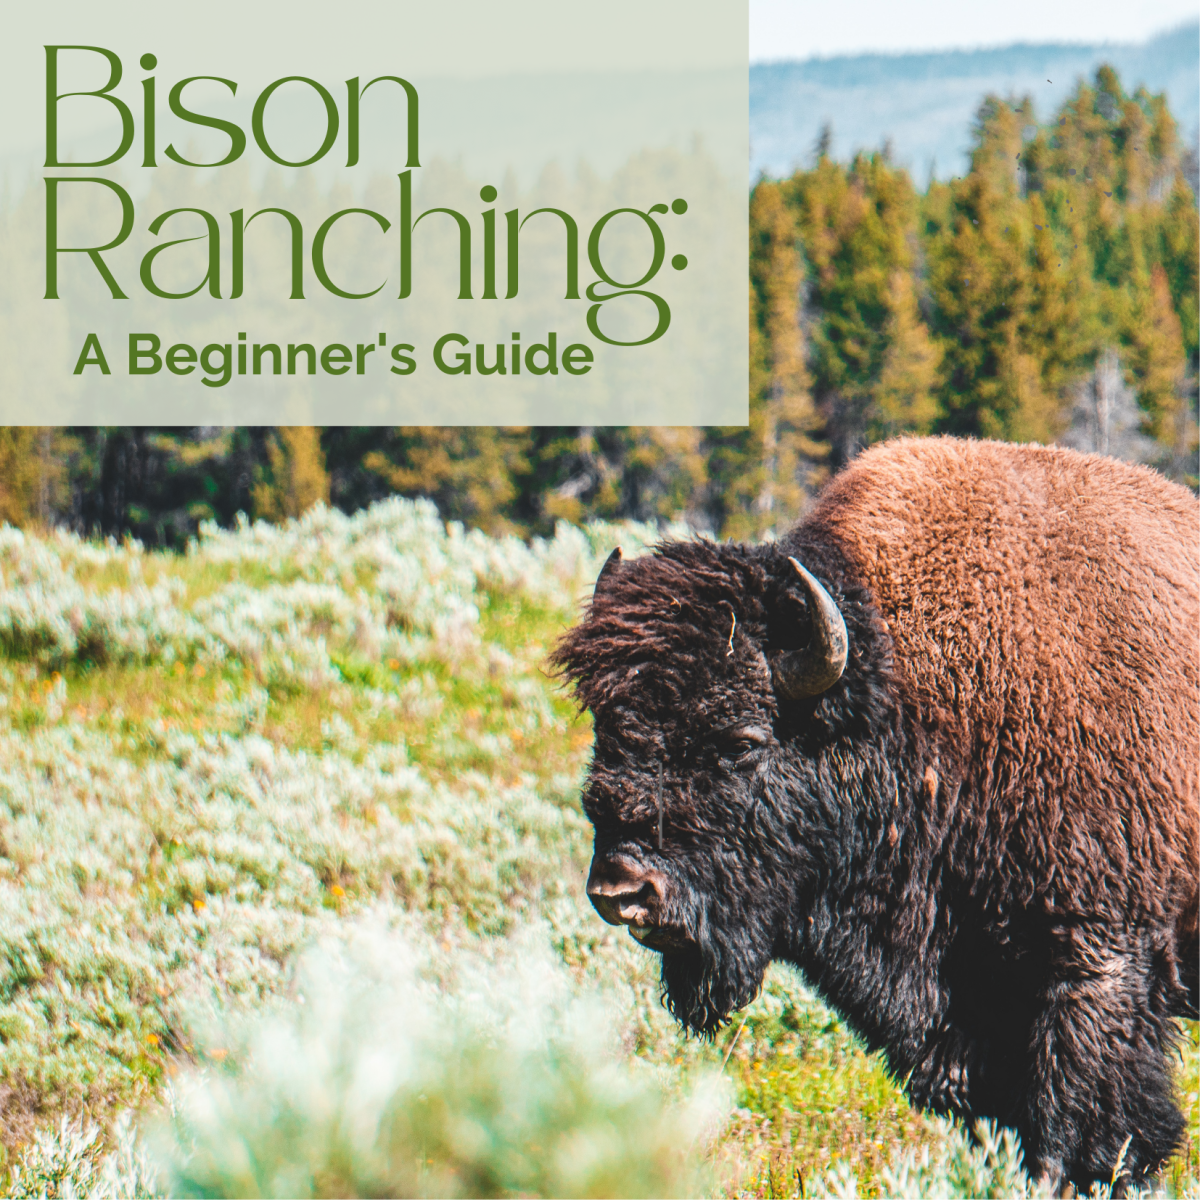 Bison Ranching for Beginners